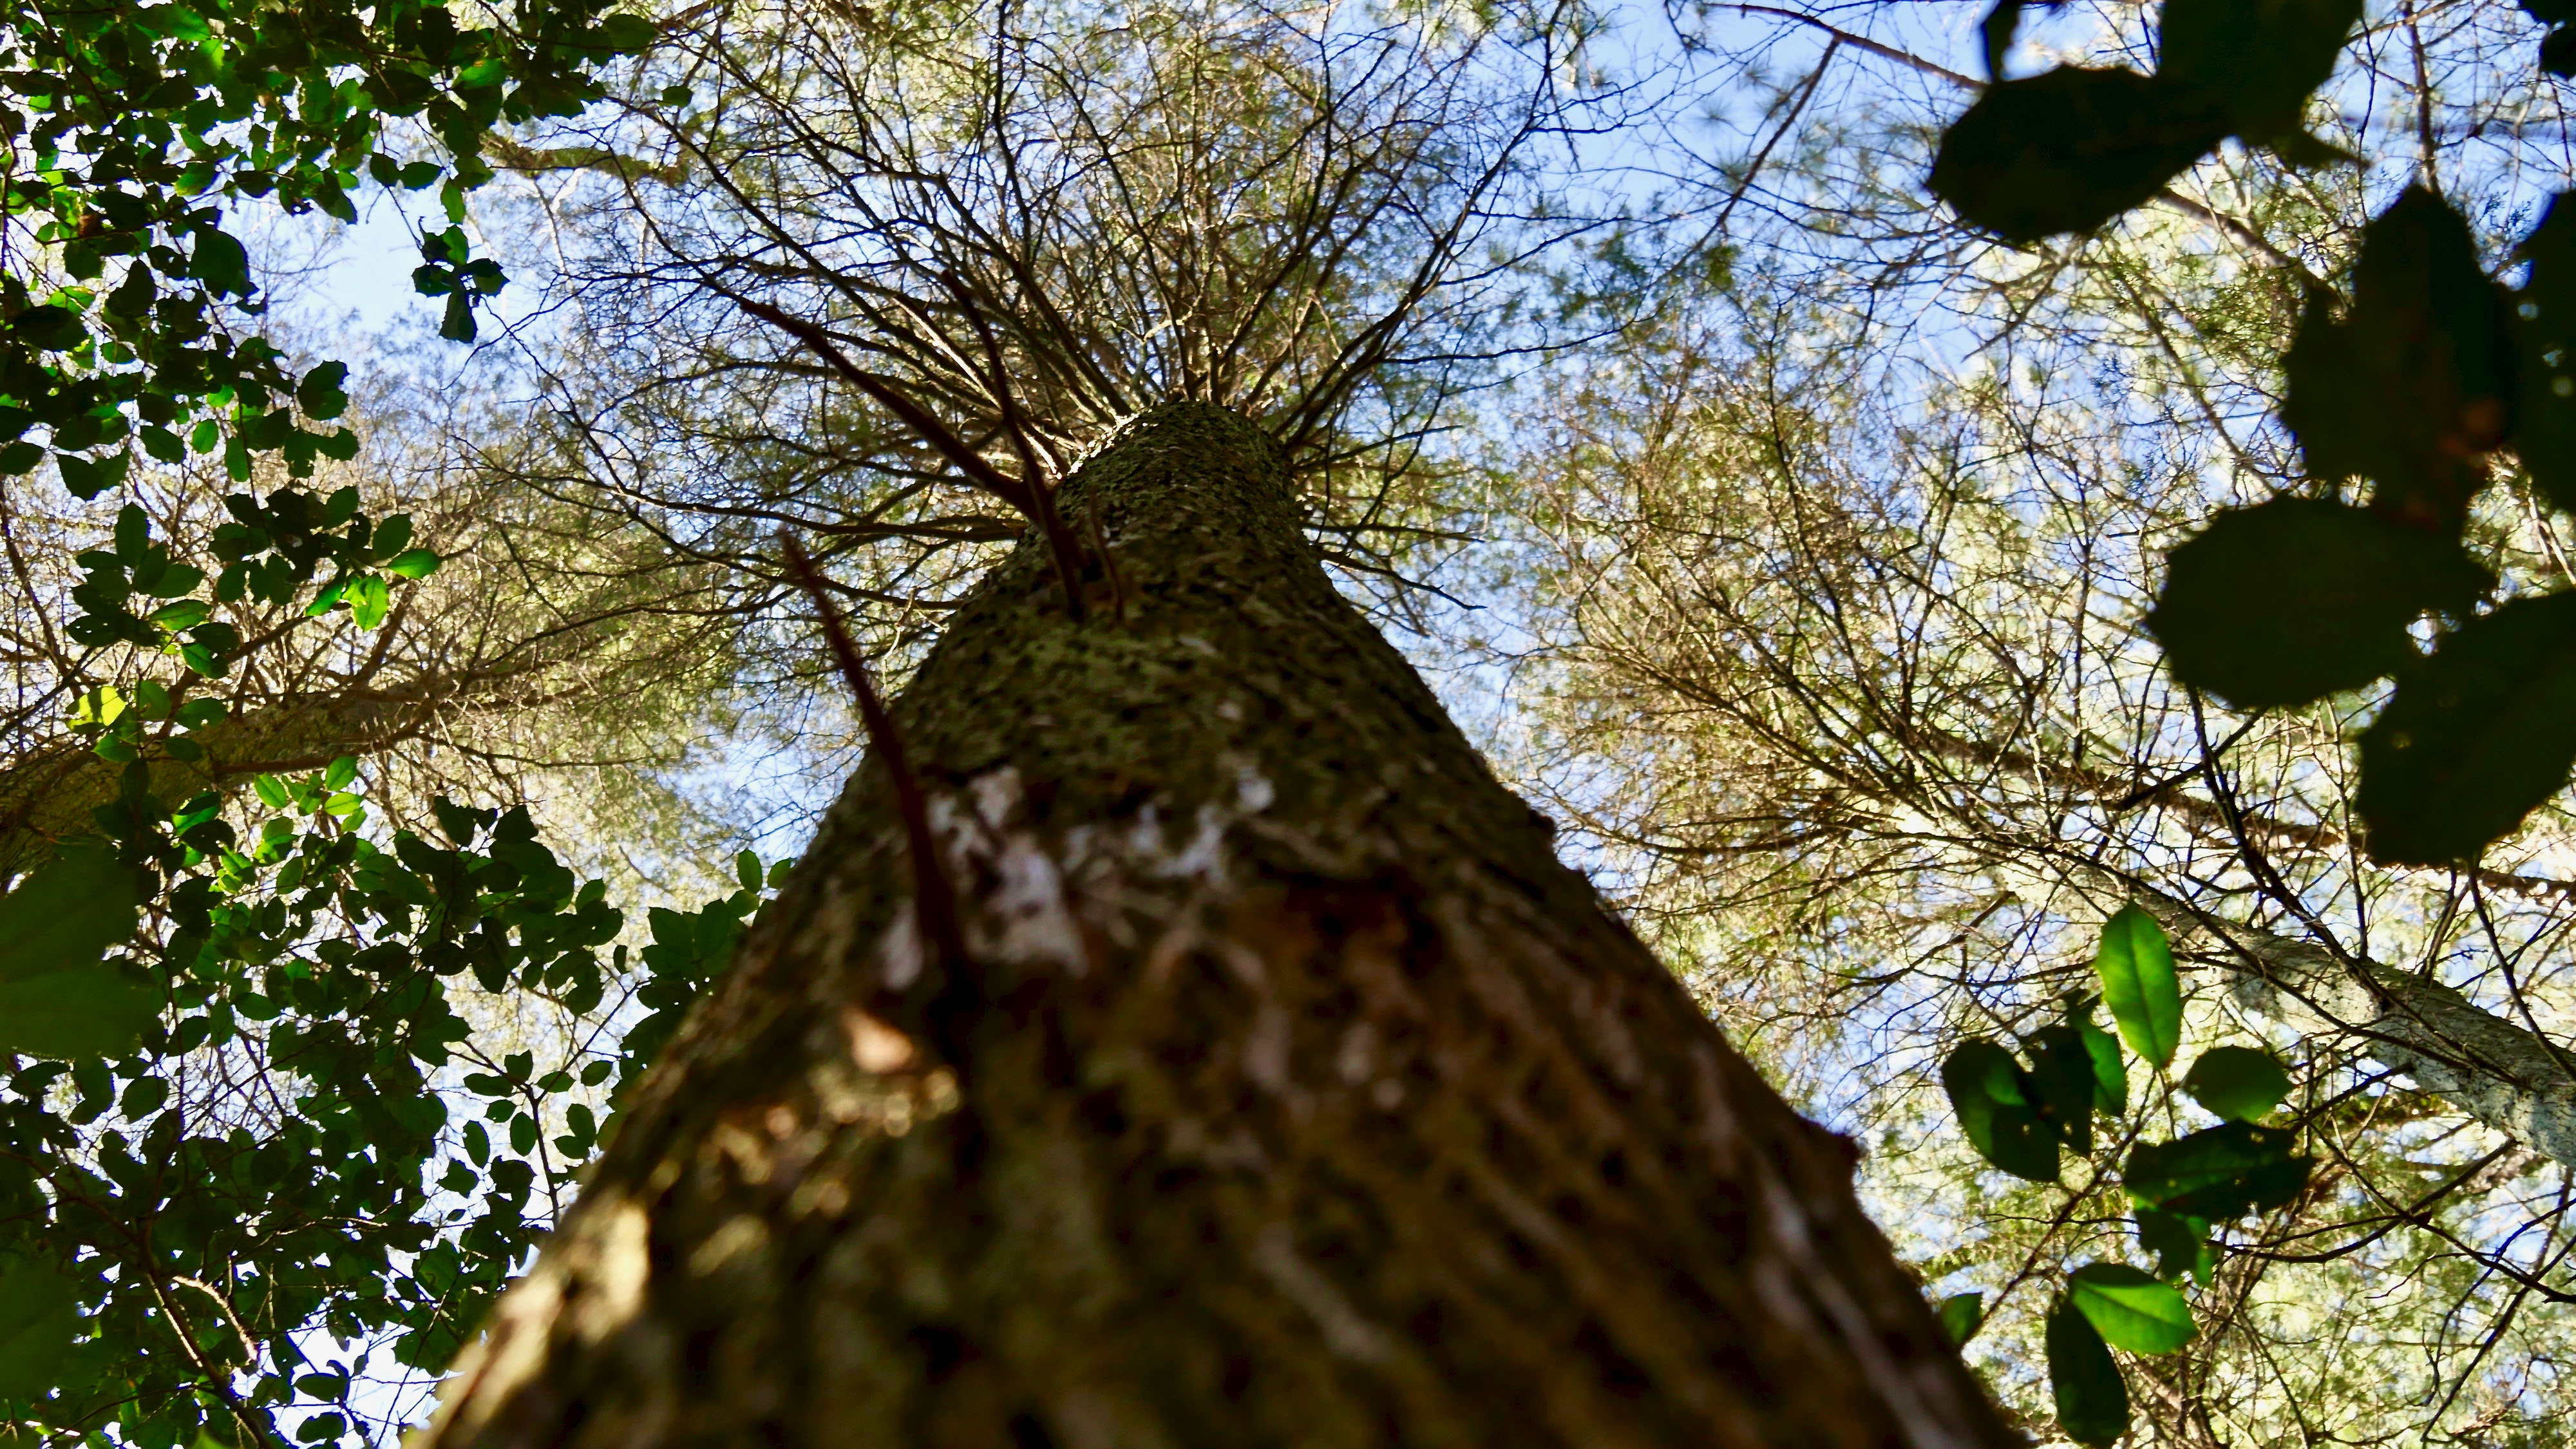 Looking up along the rough bark of an Atlantic White cedar tree into the spreading branches of its crown.